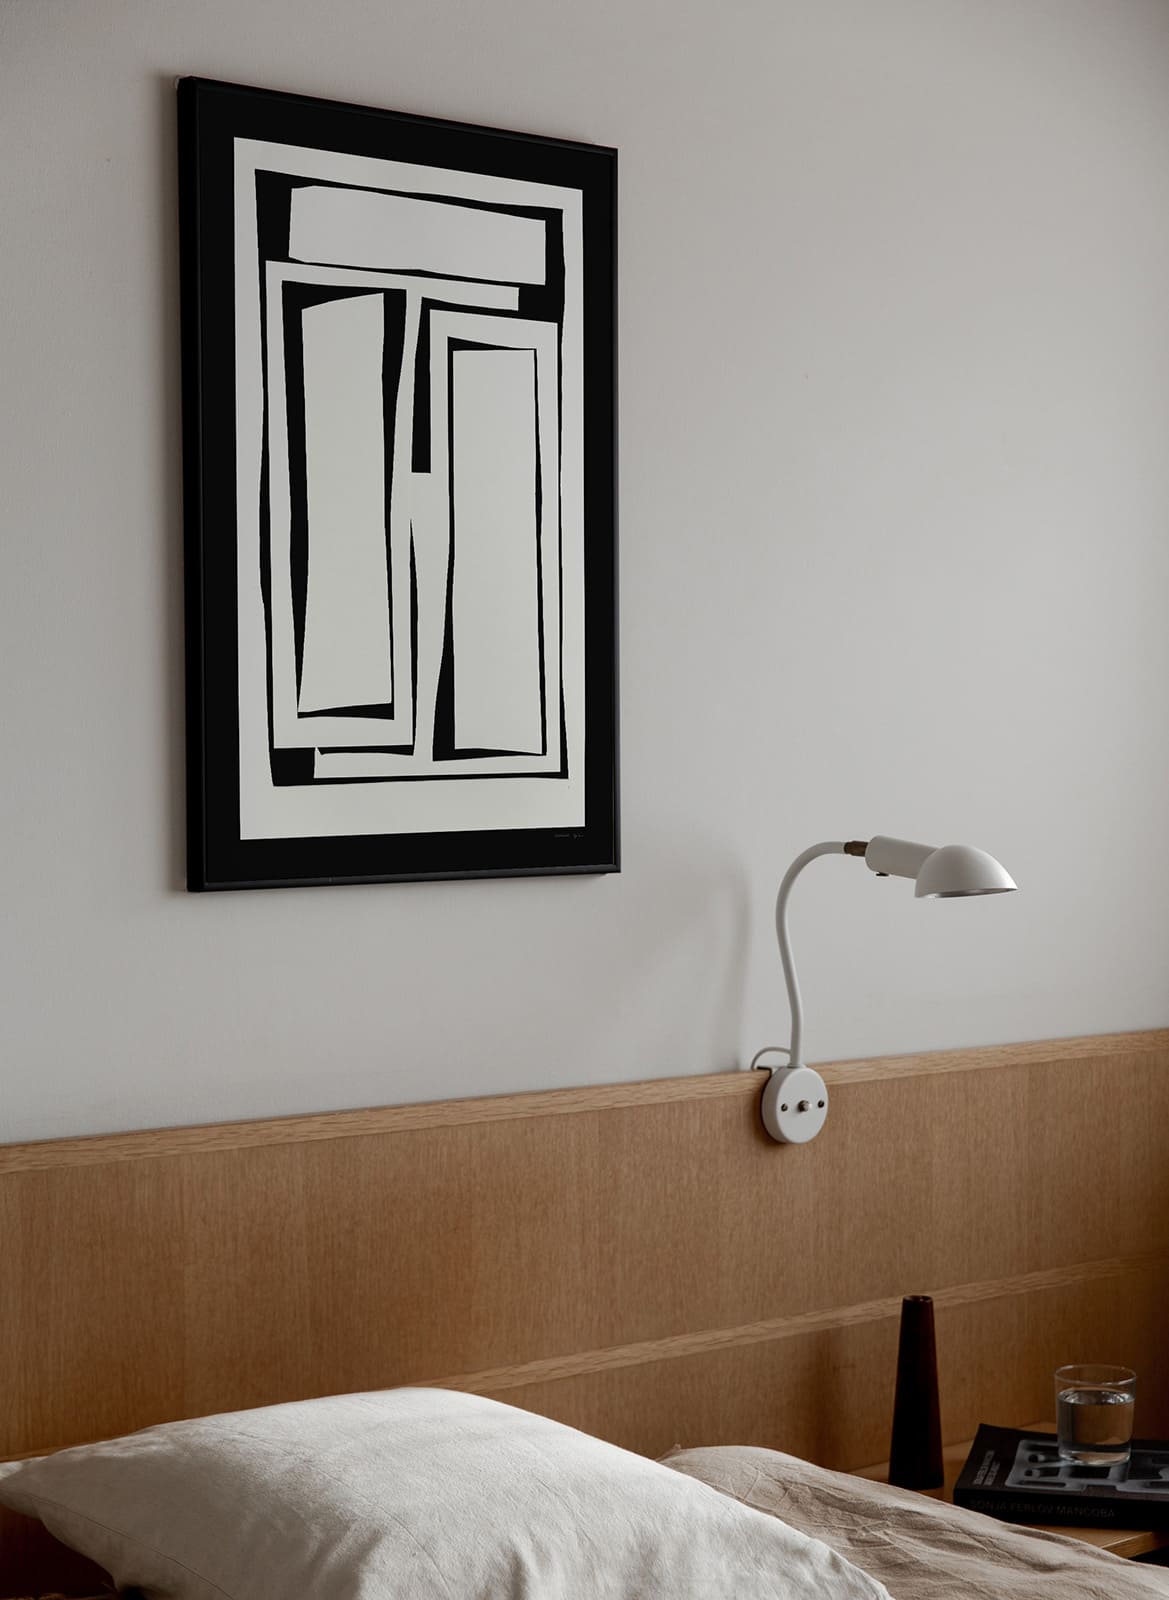 Framed minimalistic poster hanging above a bed by Atelier Cph